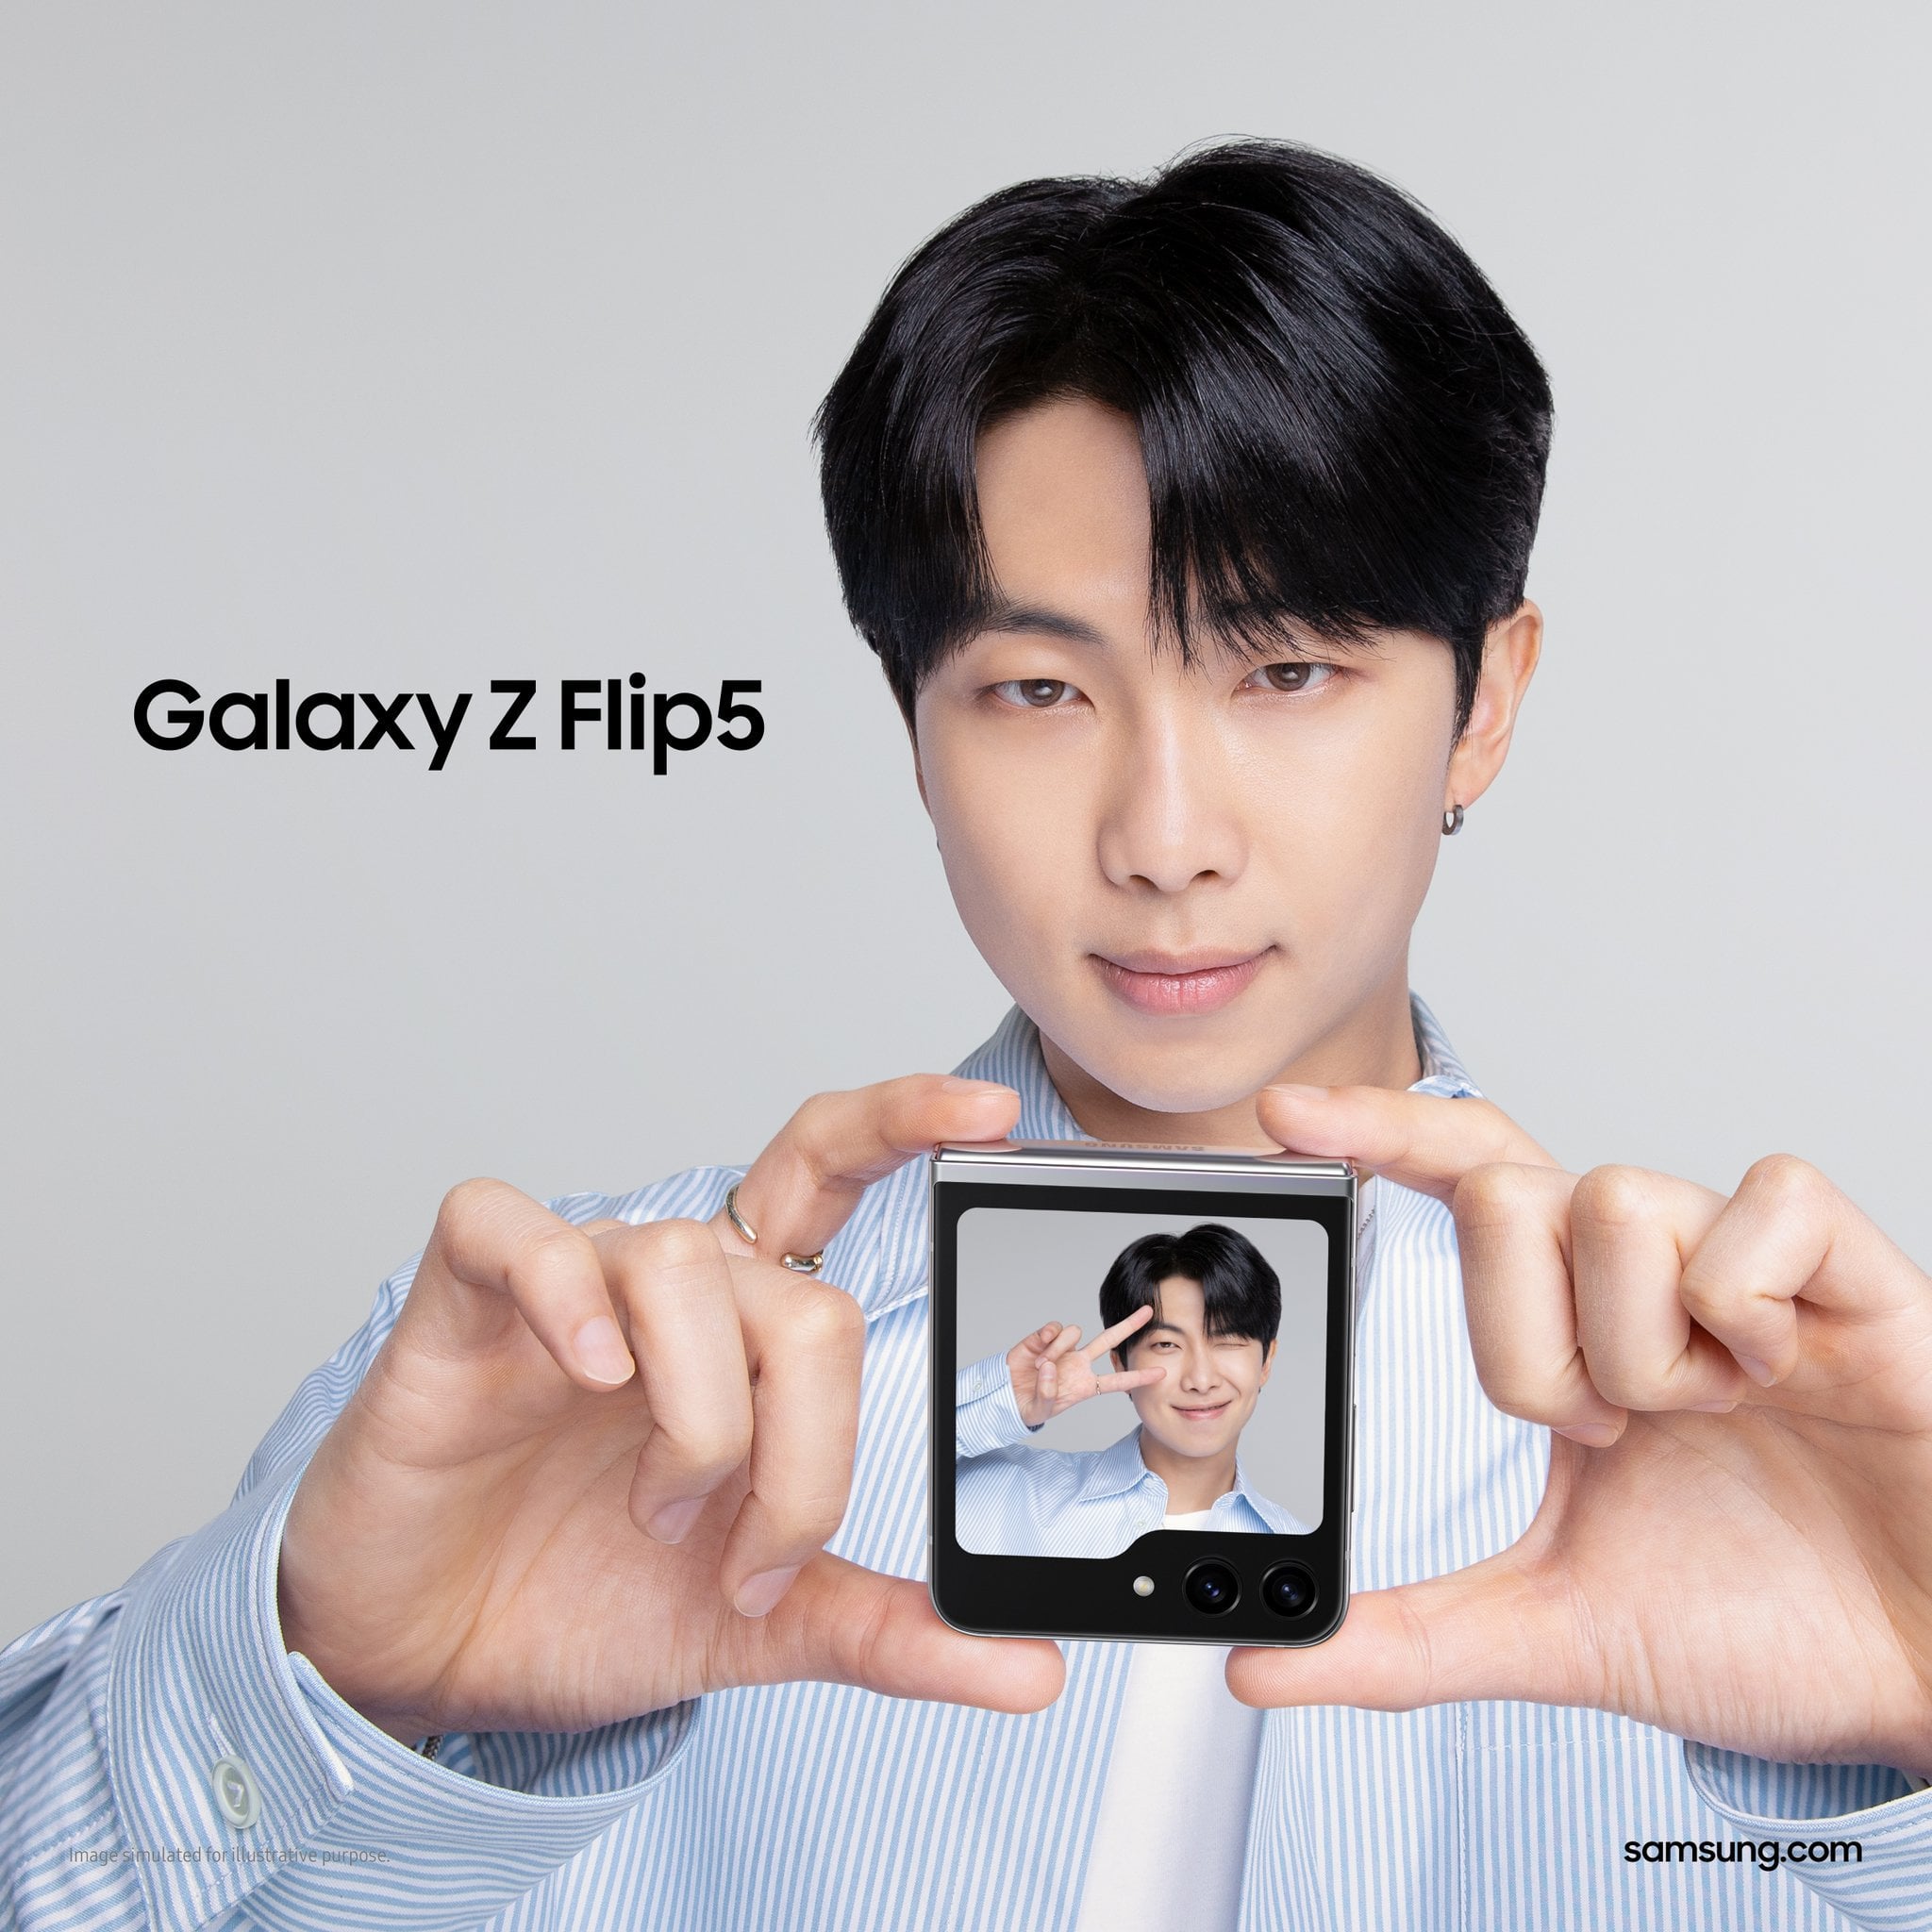 230914 Samsung Mobile: We 💜 RM of BTS’s aesthetic photos, and RM 💜 the new Galaxy Z Flip 5 too!